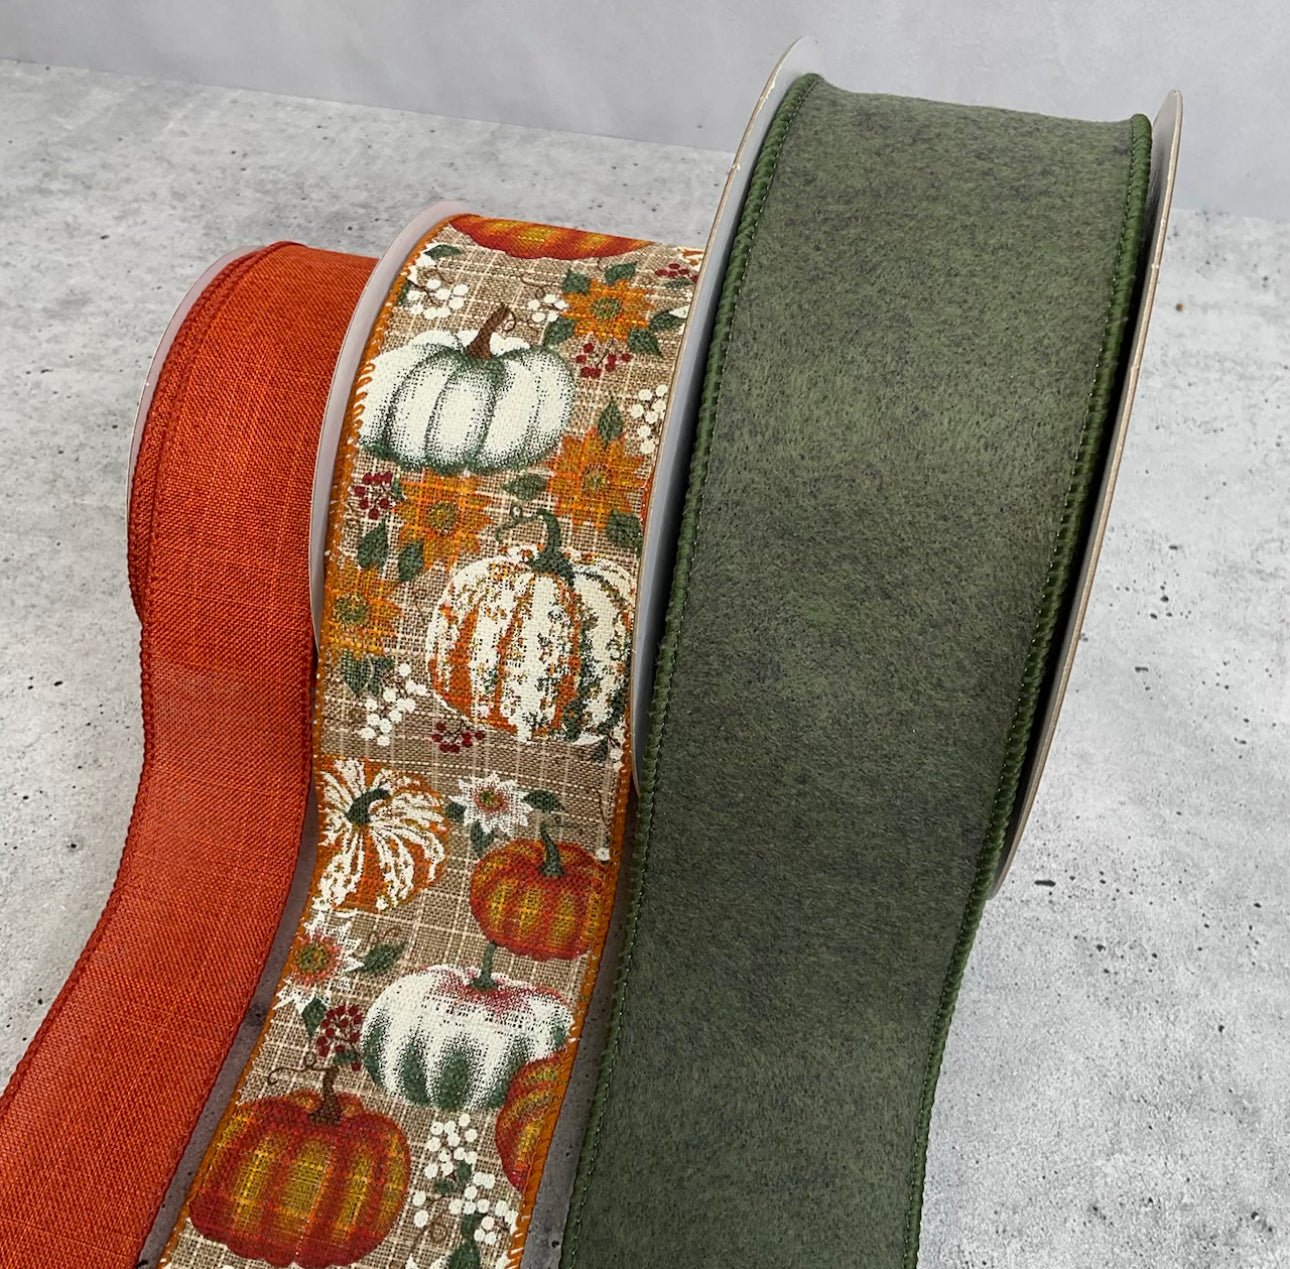 Pumpkin and flannel bow bundle x 3 coordinating wired ribbons - Greenery MarketWired ribbon